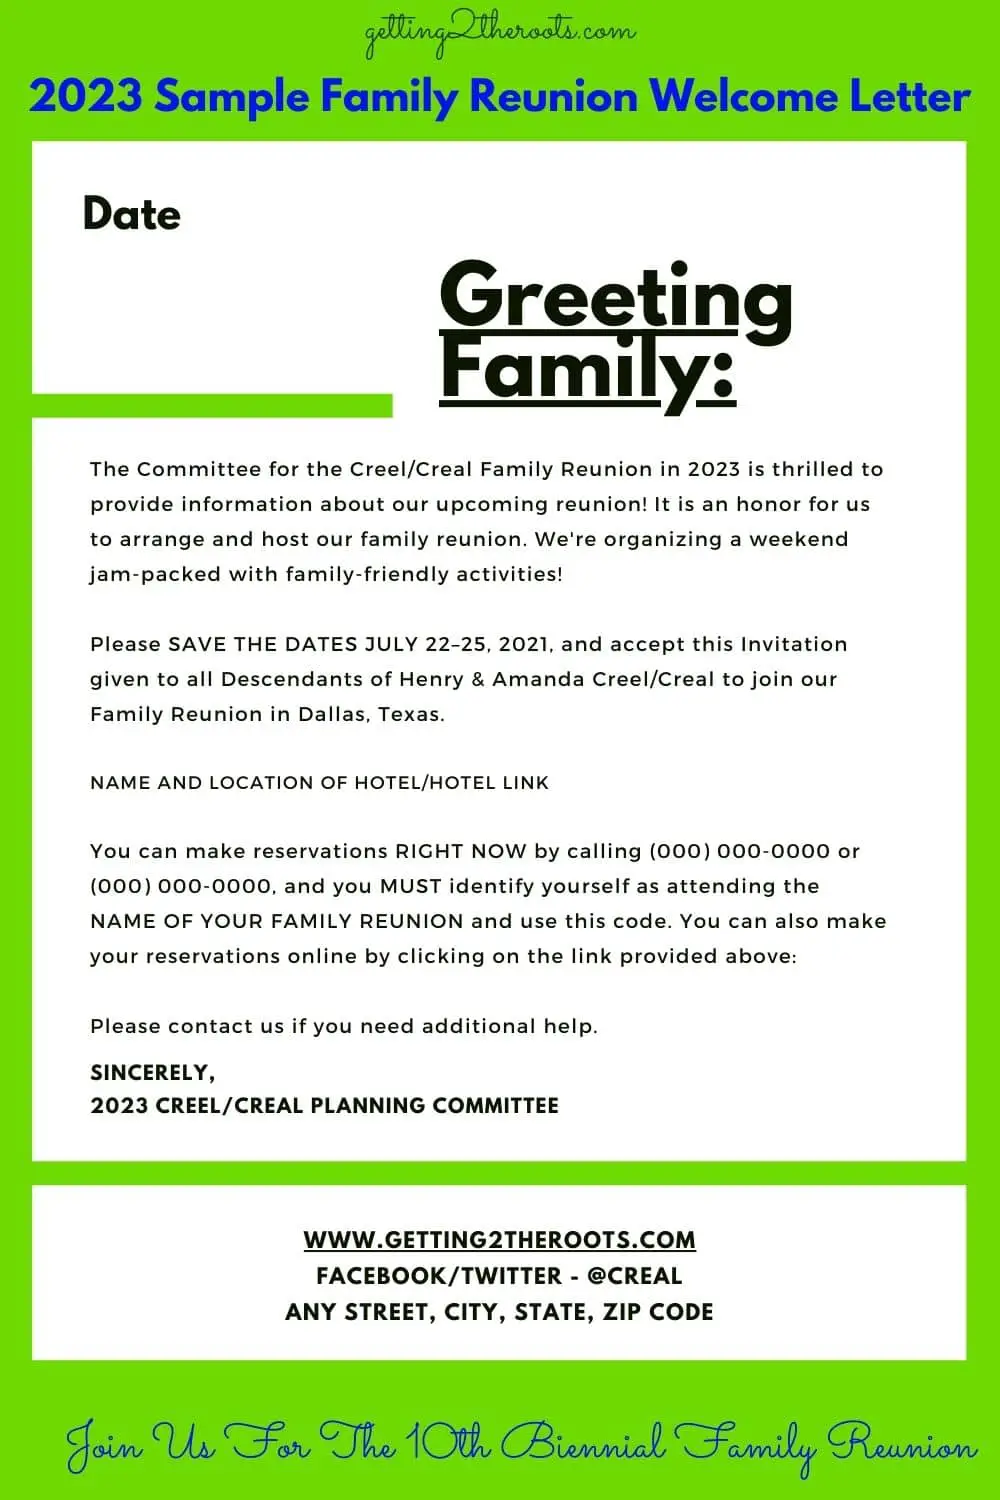 Sample Family Reunion Letter | Getting2theRoots